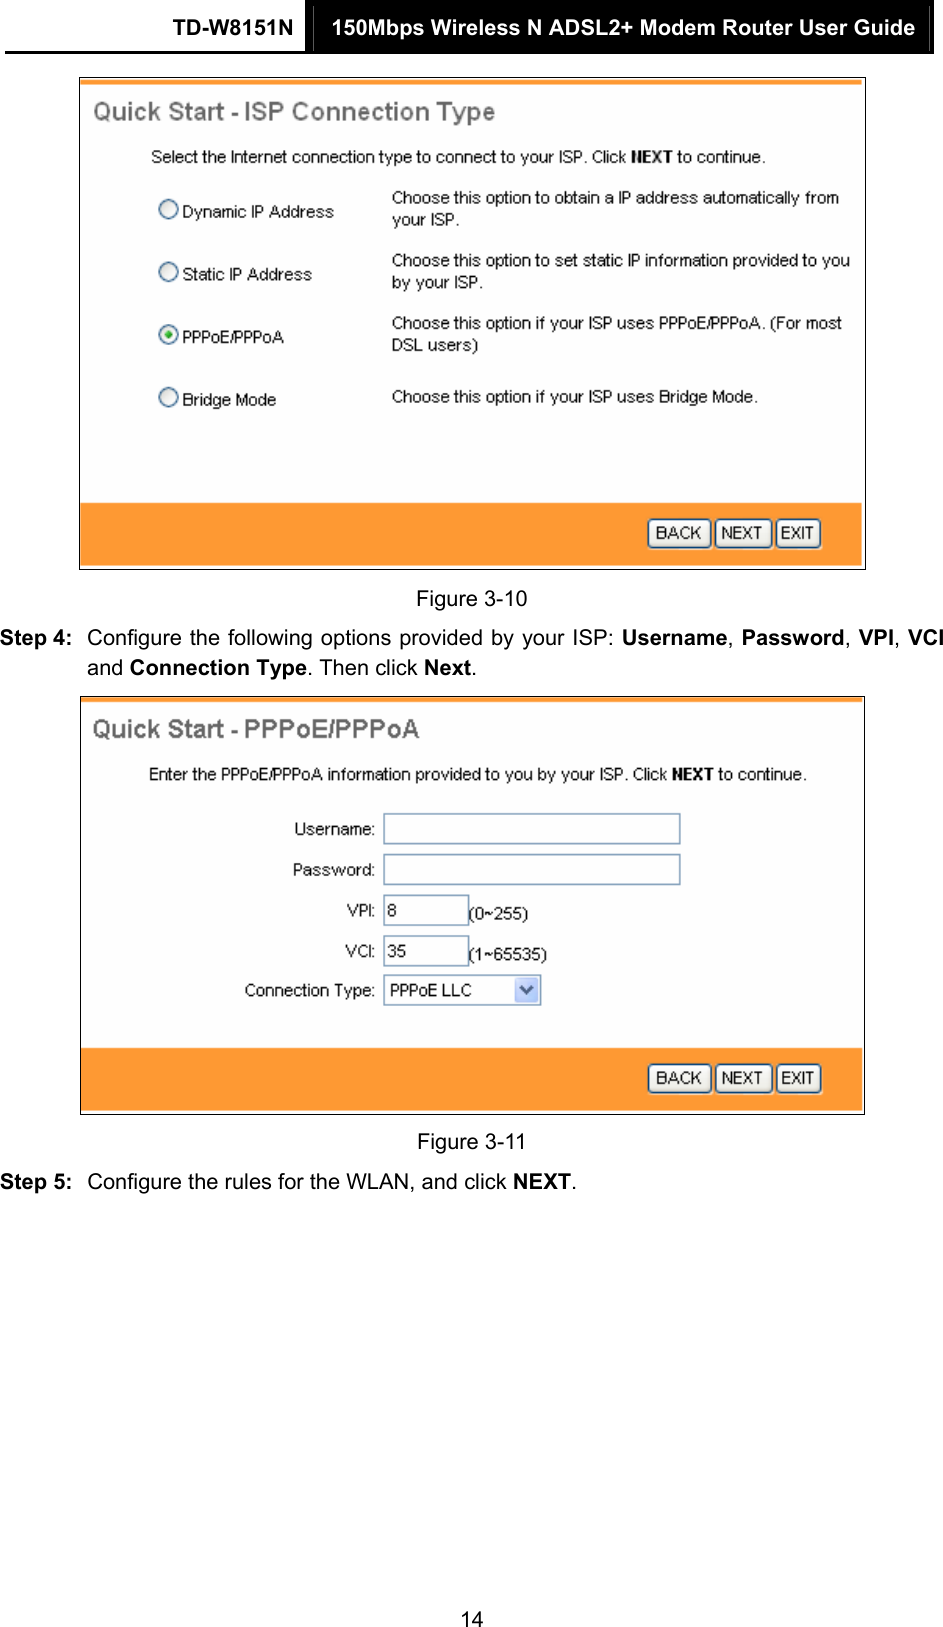 TD-W8151N  150Mbps Wireless N ADSL2+ Modem Router User Guide  14 Figure 3-10 Step 4:  Configure the following options provided by your ISP: Username, Password, VPI, VCI and Connection Type. Then click Next.  Figure 3-11 Step 5:  Configure the rules for the WLAN, and click NEXT. 